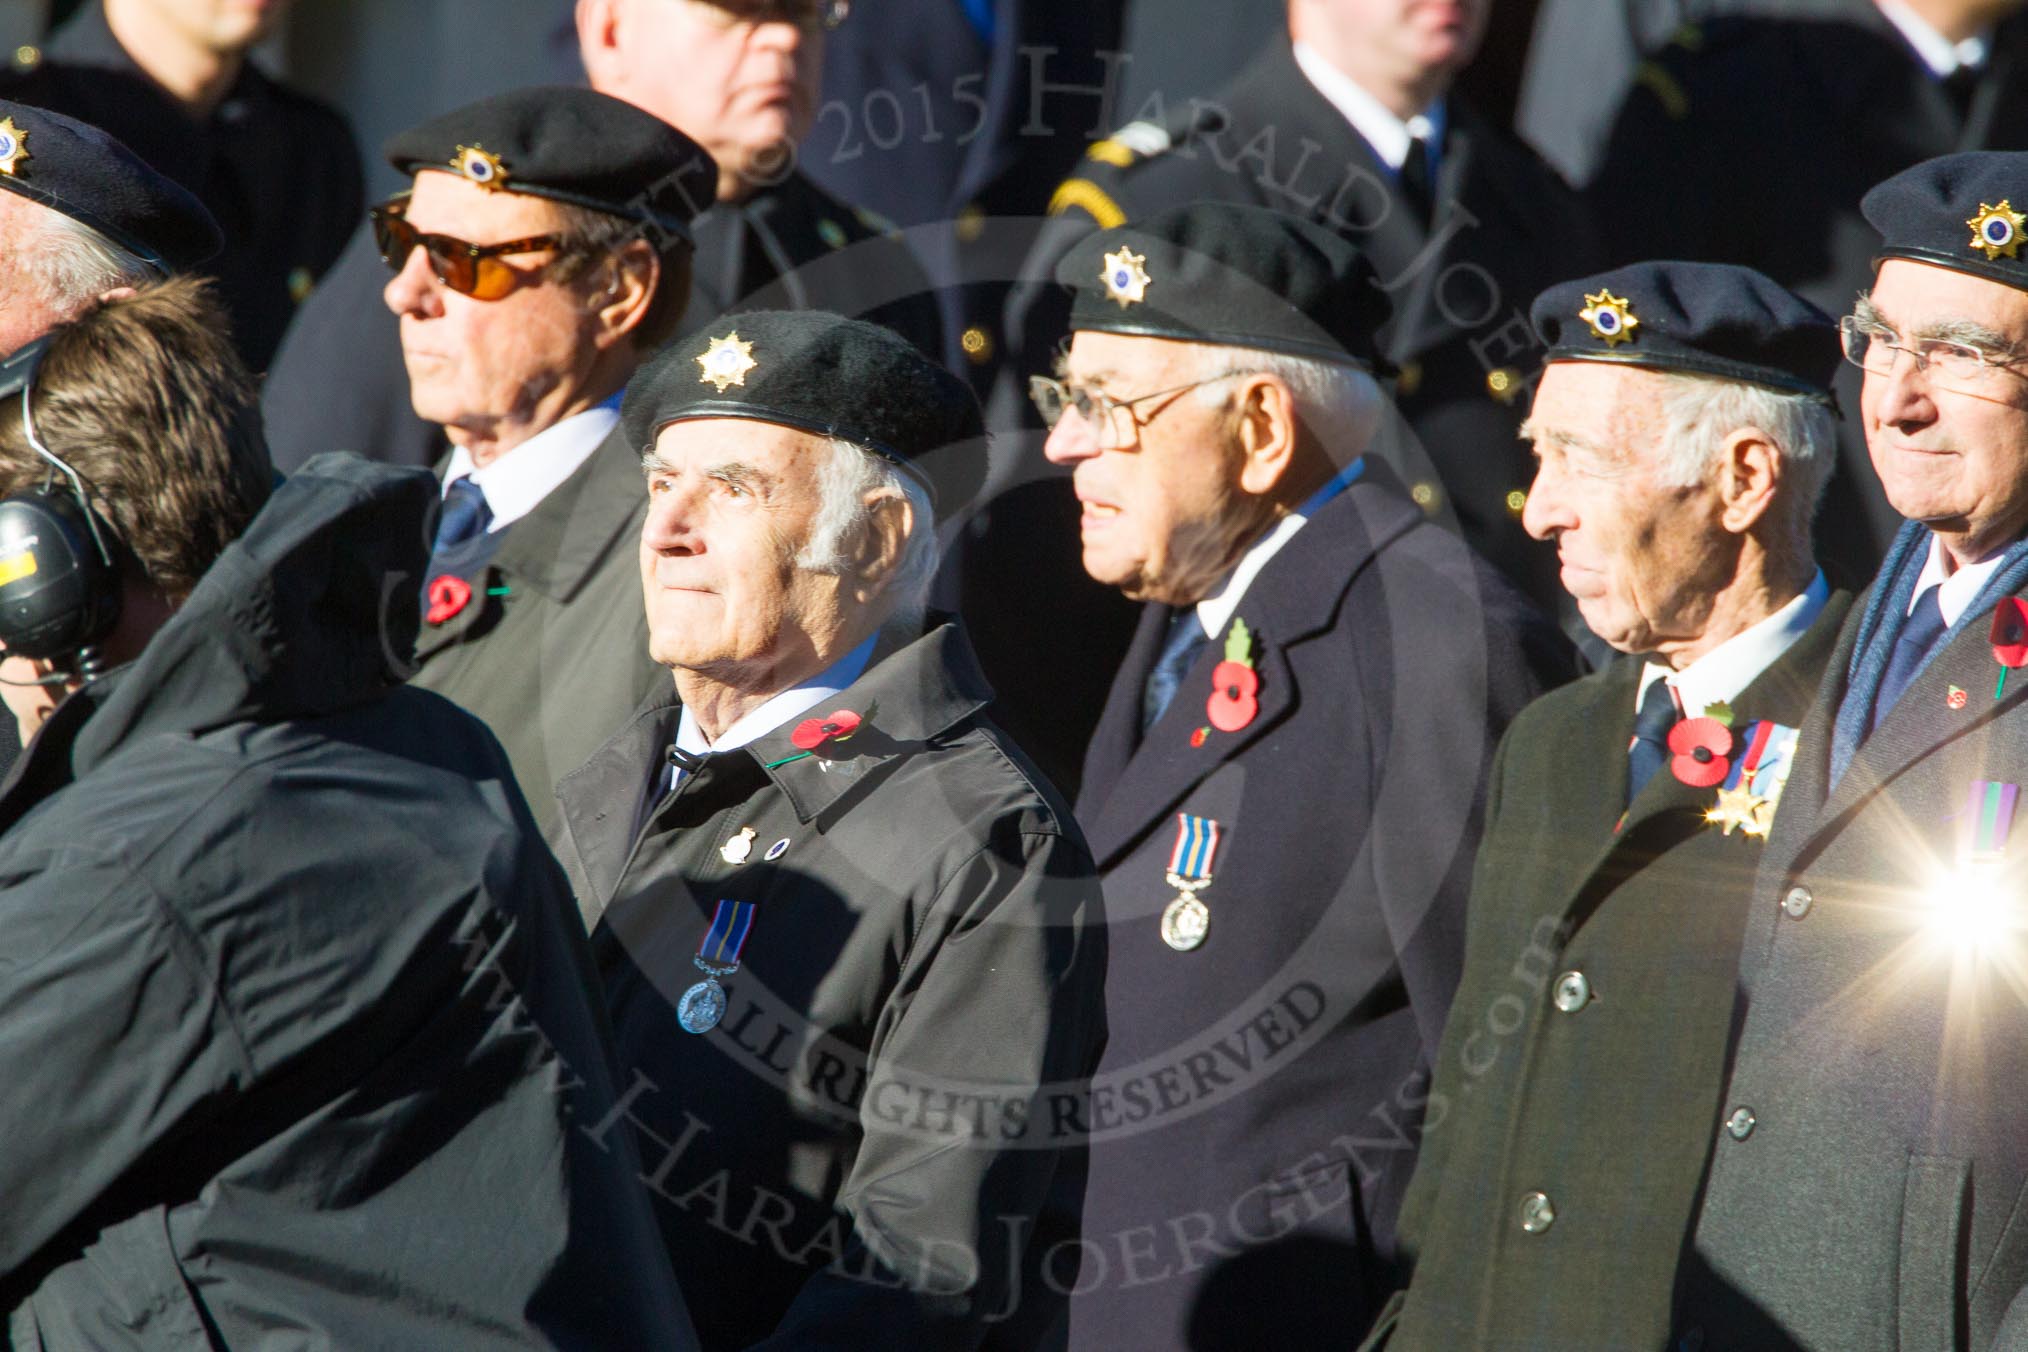 Remembrance Sunday Cenotaph March Past 2013: D26 - Association of Jewish Ex-Servicemen & Women..
Press stand opposite the Foreign Office building, Whitehall, London SW1,
London,
Greater London,
United Kingdom,
on 10 November 2013 at 11:41, image #212